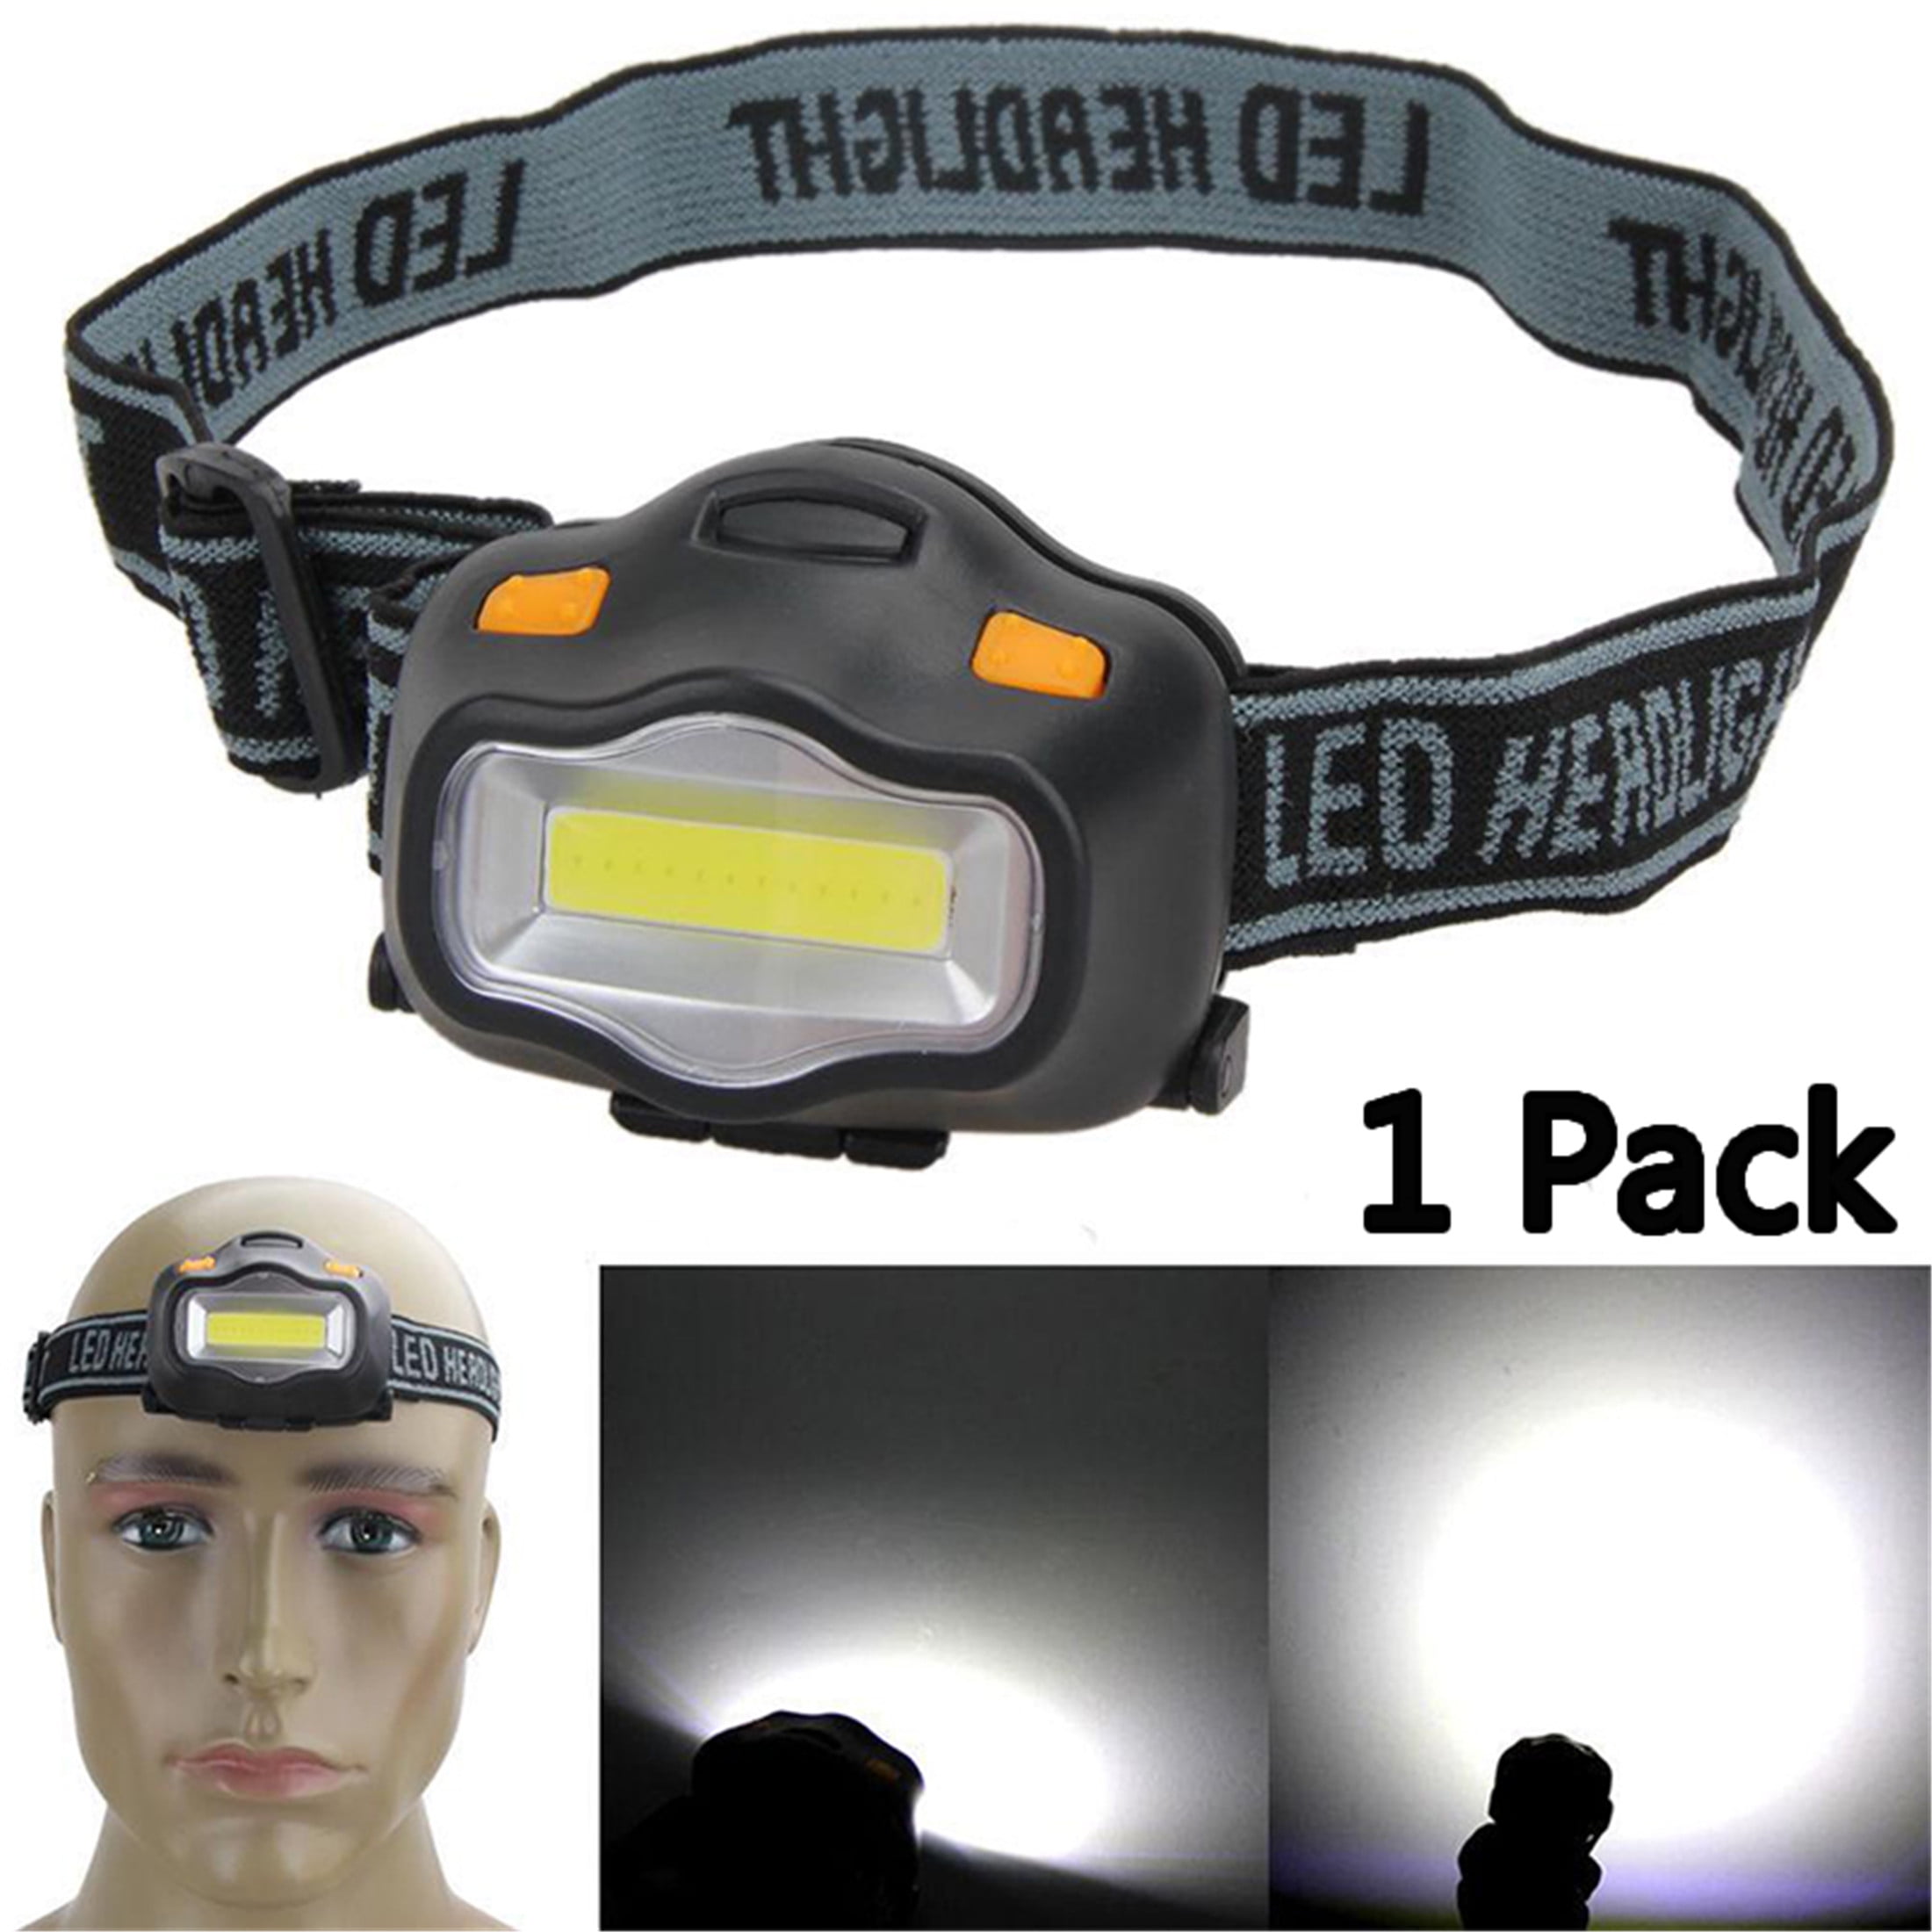 LED Headlamp 100 Lumens 1Pc, Elbourn Super Bright Head Lamp Modes  Waterproof Hat Work Light for Camping Hunting